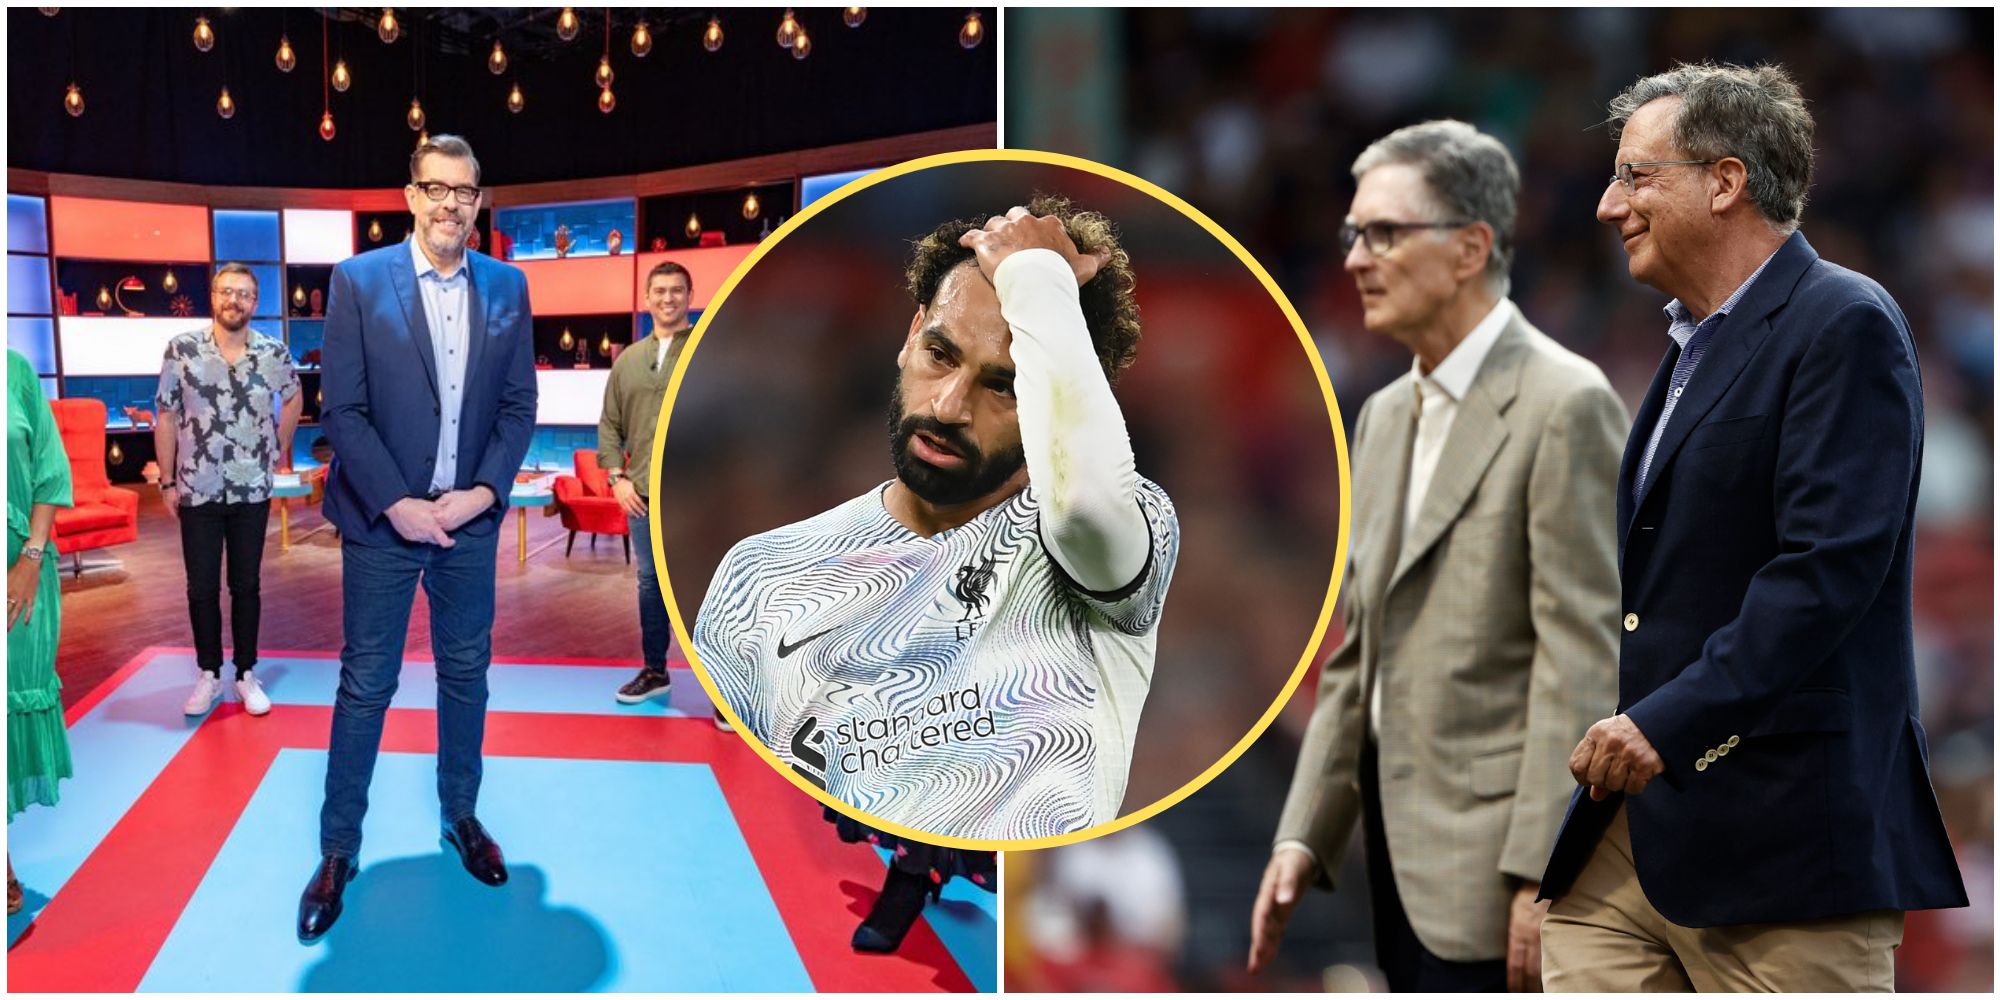 TV quiz show host jokes he’ll buy Liverpool and force Mo Salah to pay him $8 a month